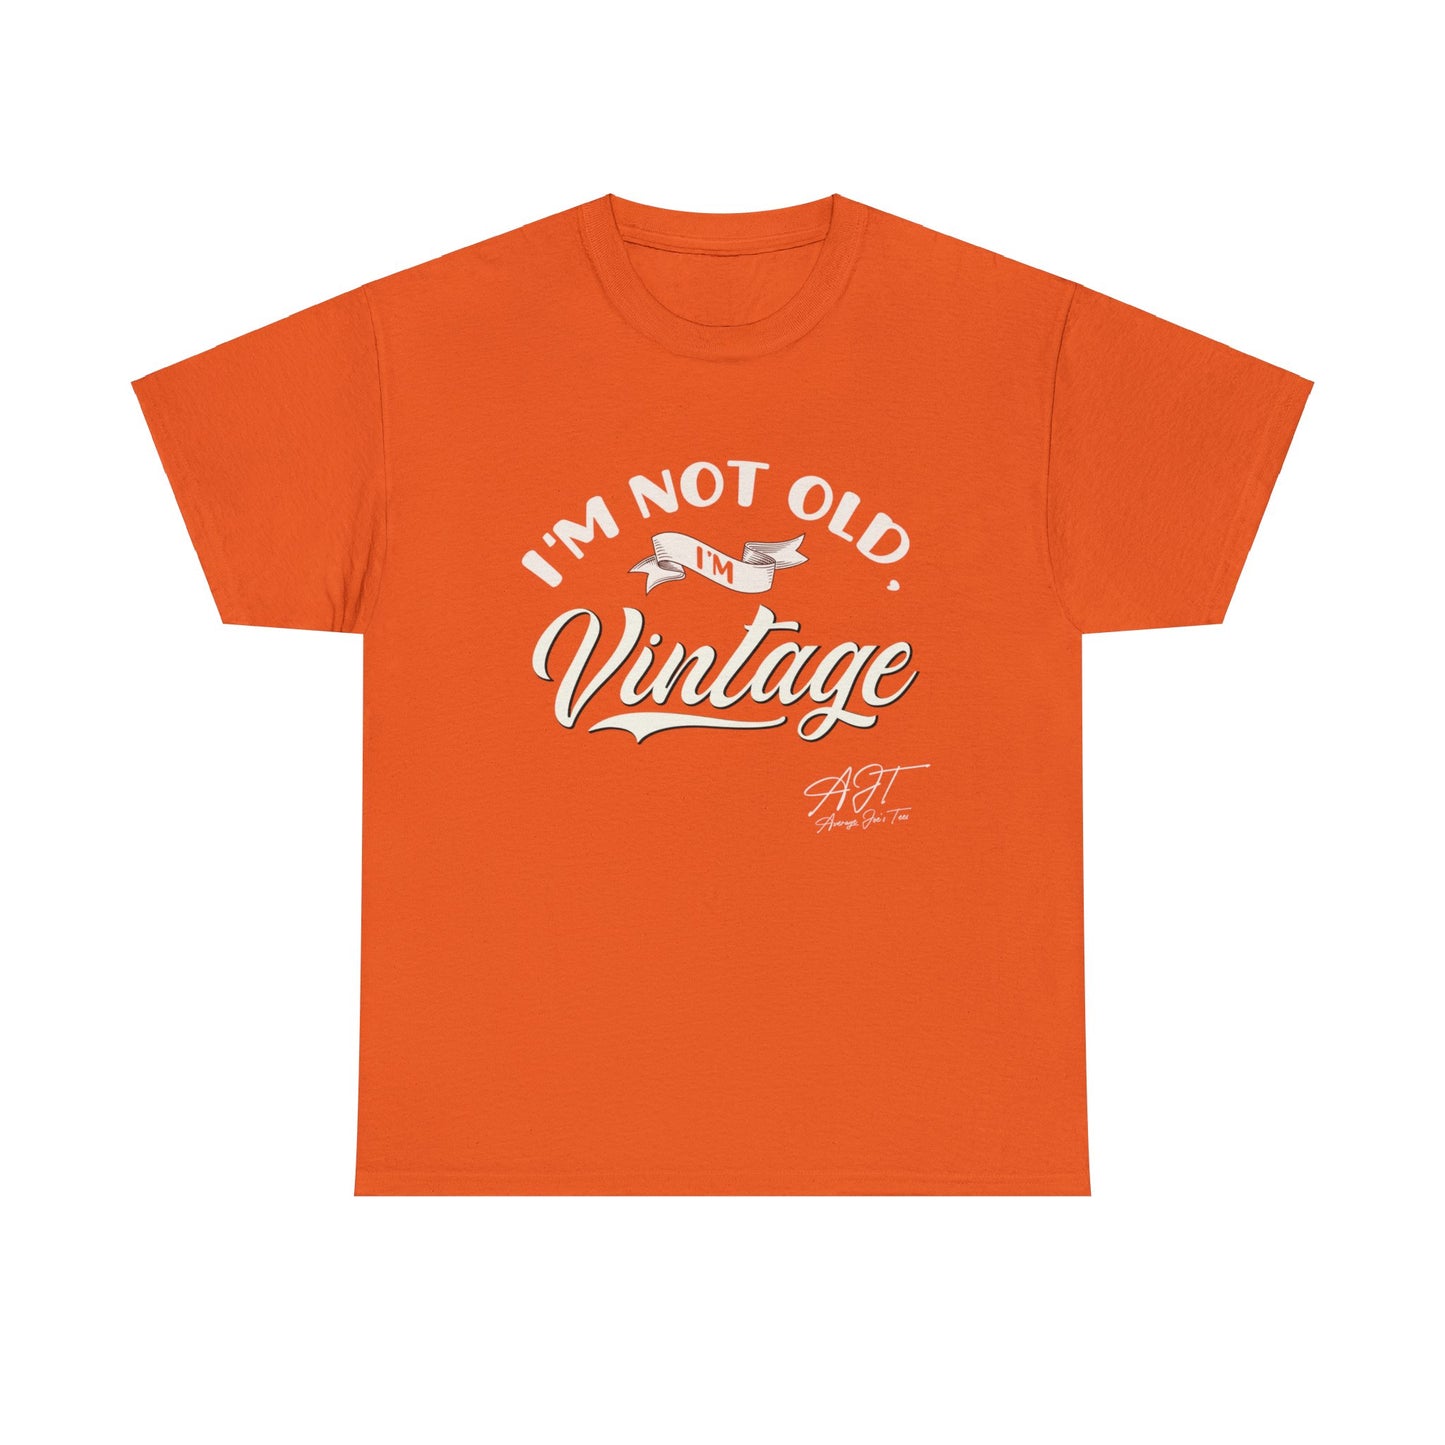 "I'm Not Old" Cotton Tee